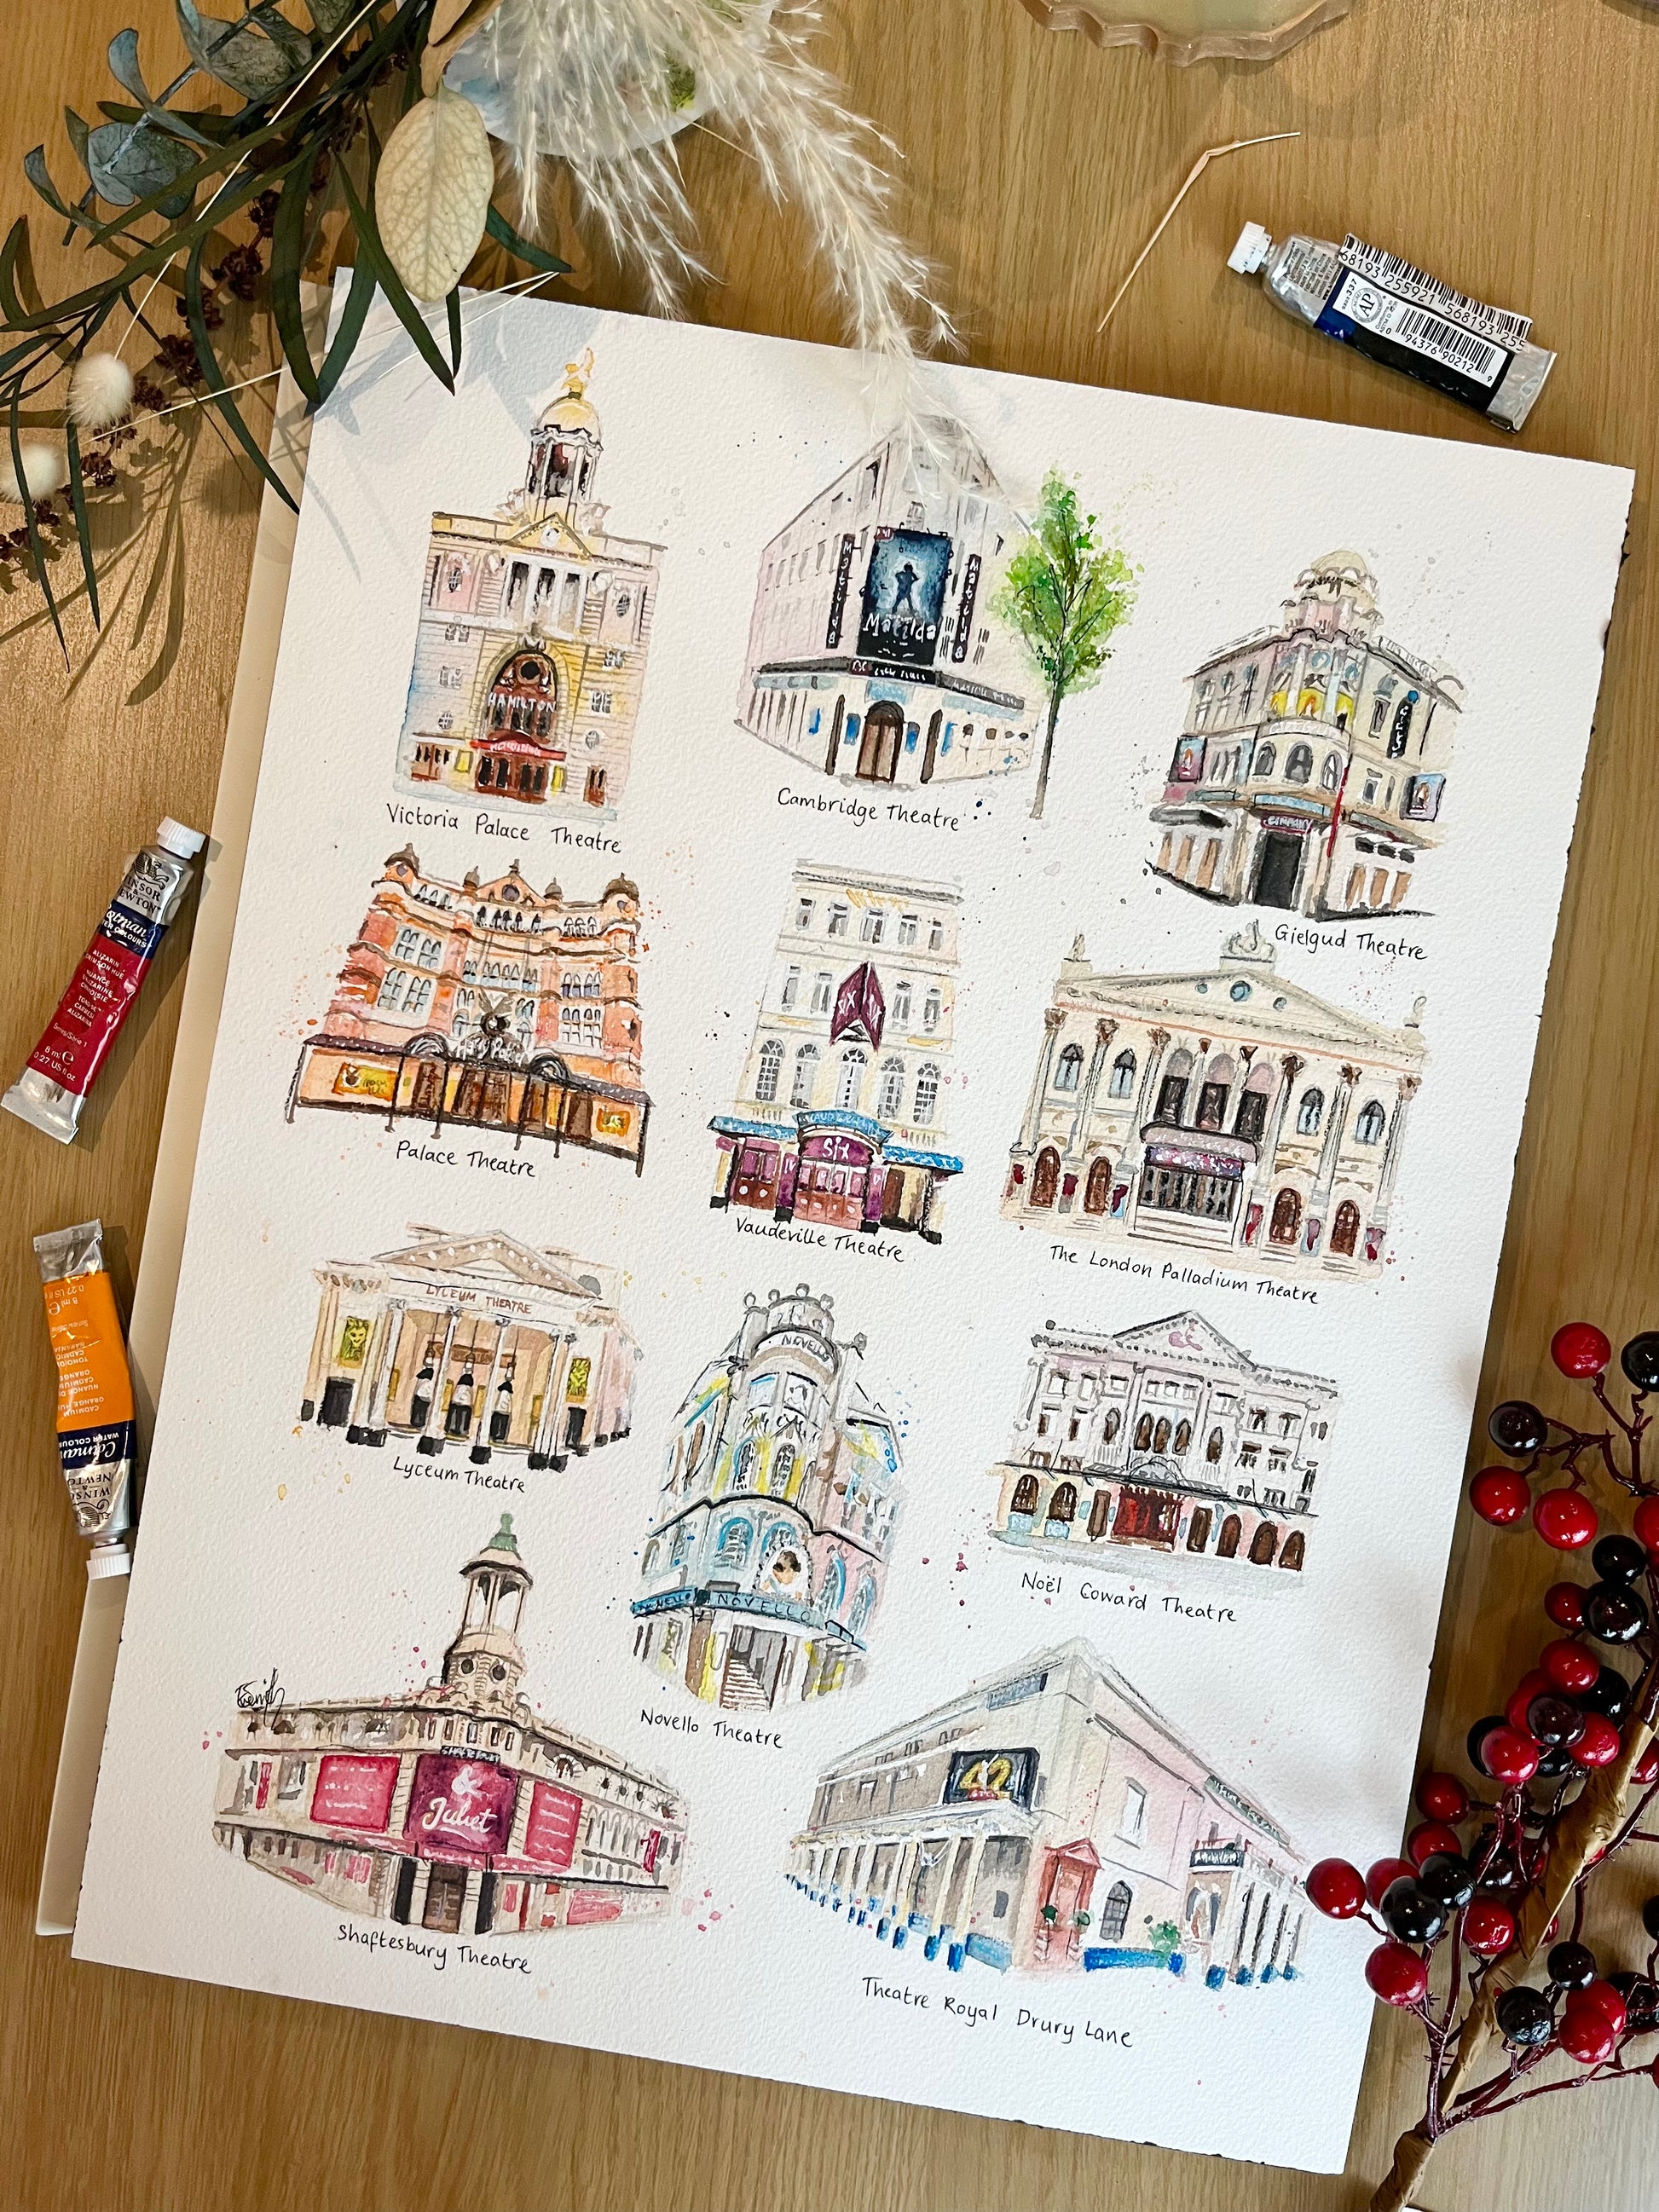 Watercolour illustrations of West End Theatres in London by local artist and performer, Eve Leoni Smith.